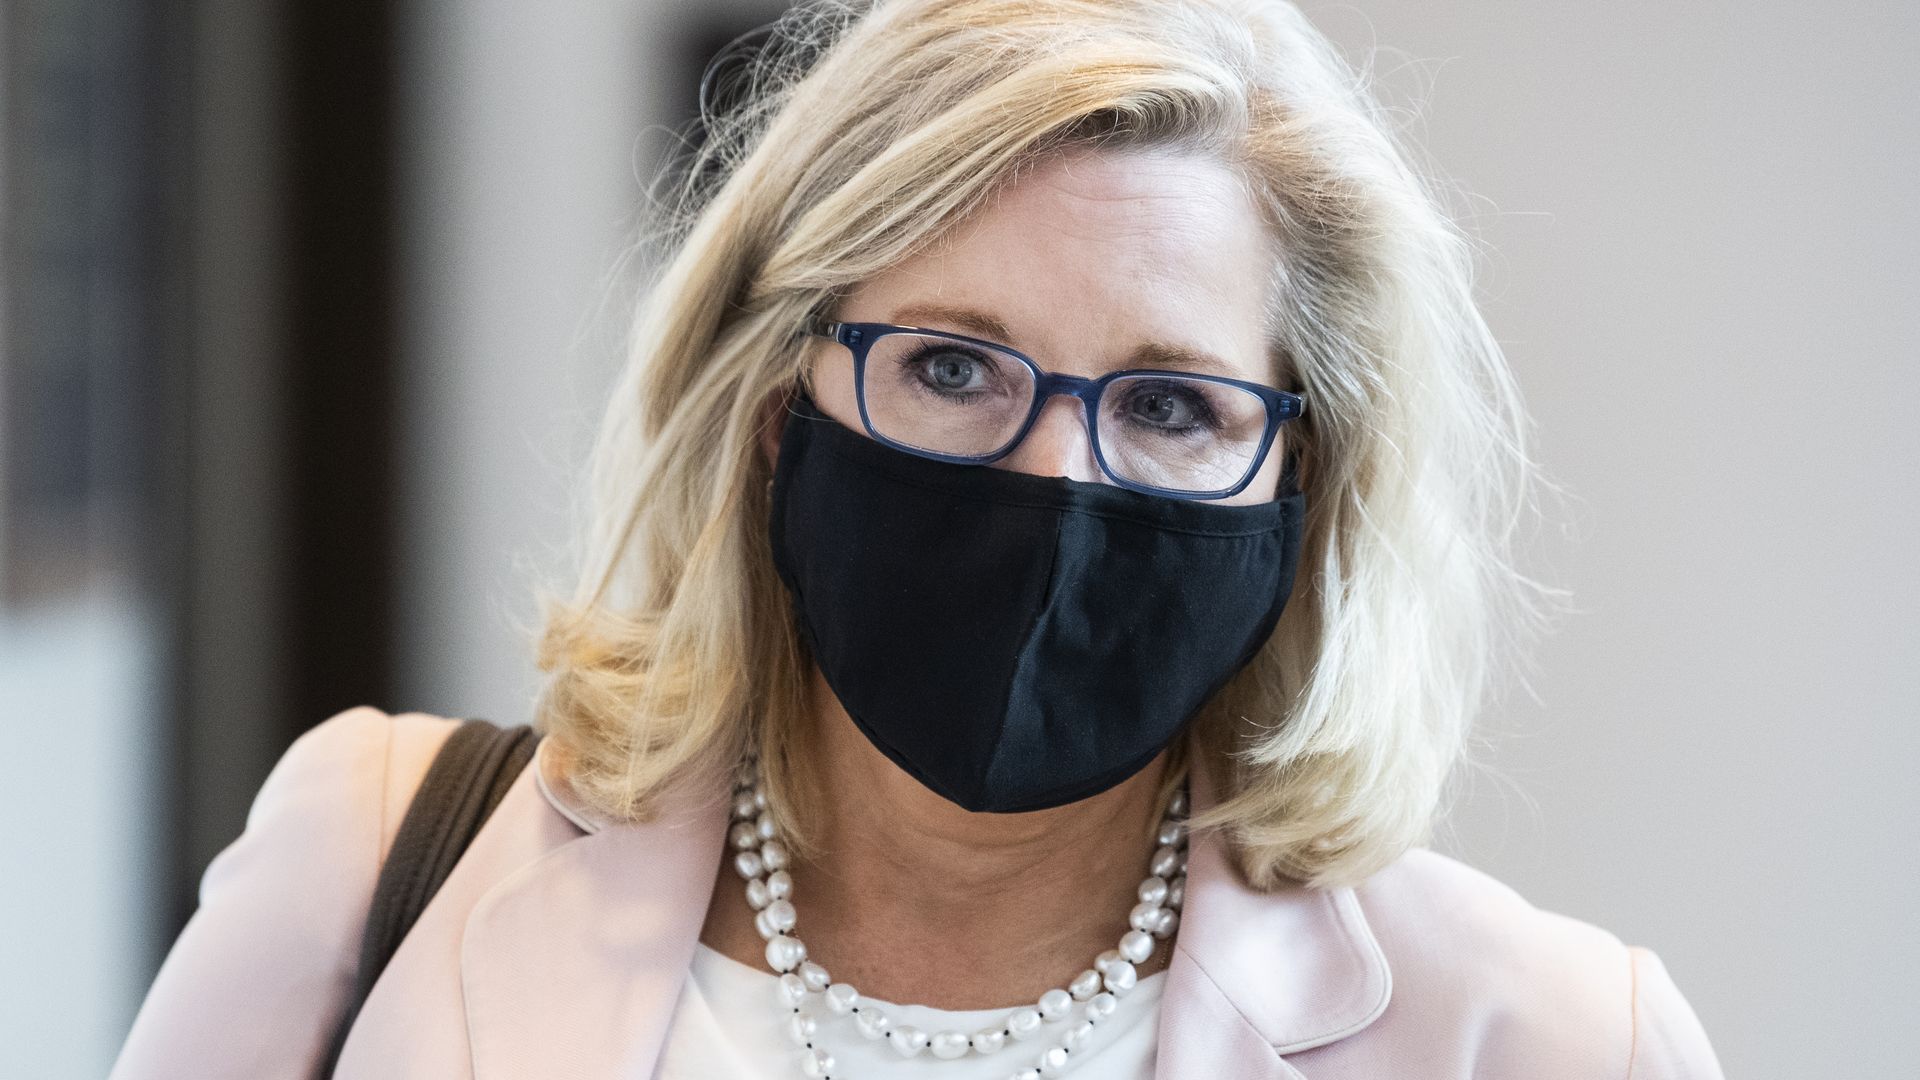 Rep. Liz Cheney, R-Wyo., is seen in the Capitol Visitor Center after a briefing by administration leaders on the U.S. withdrawal from Afghanistan on Tuesday, August 24, 2021